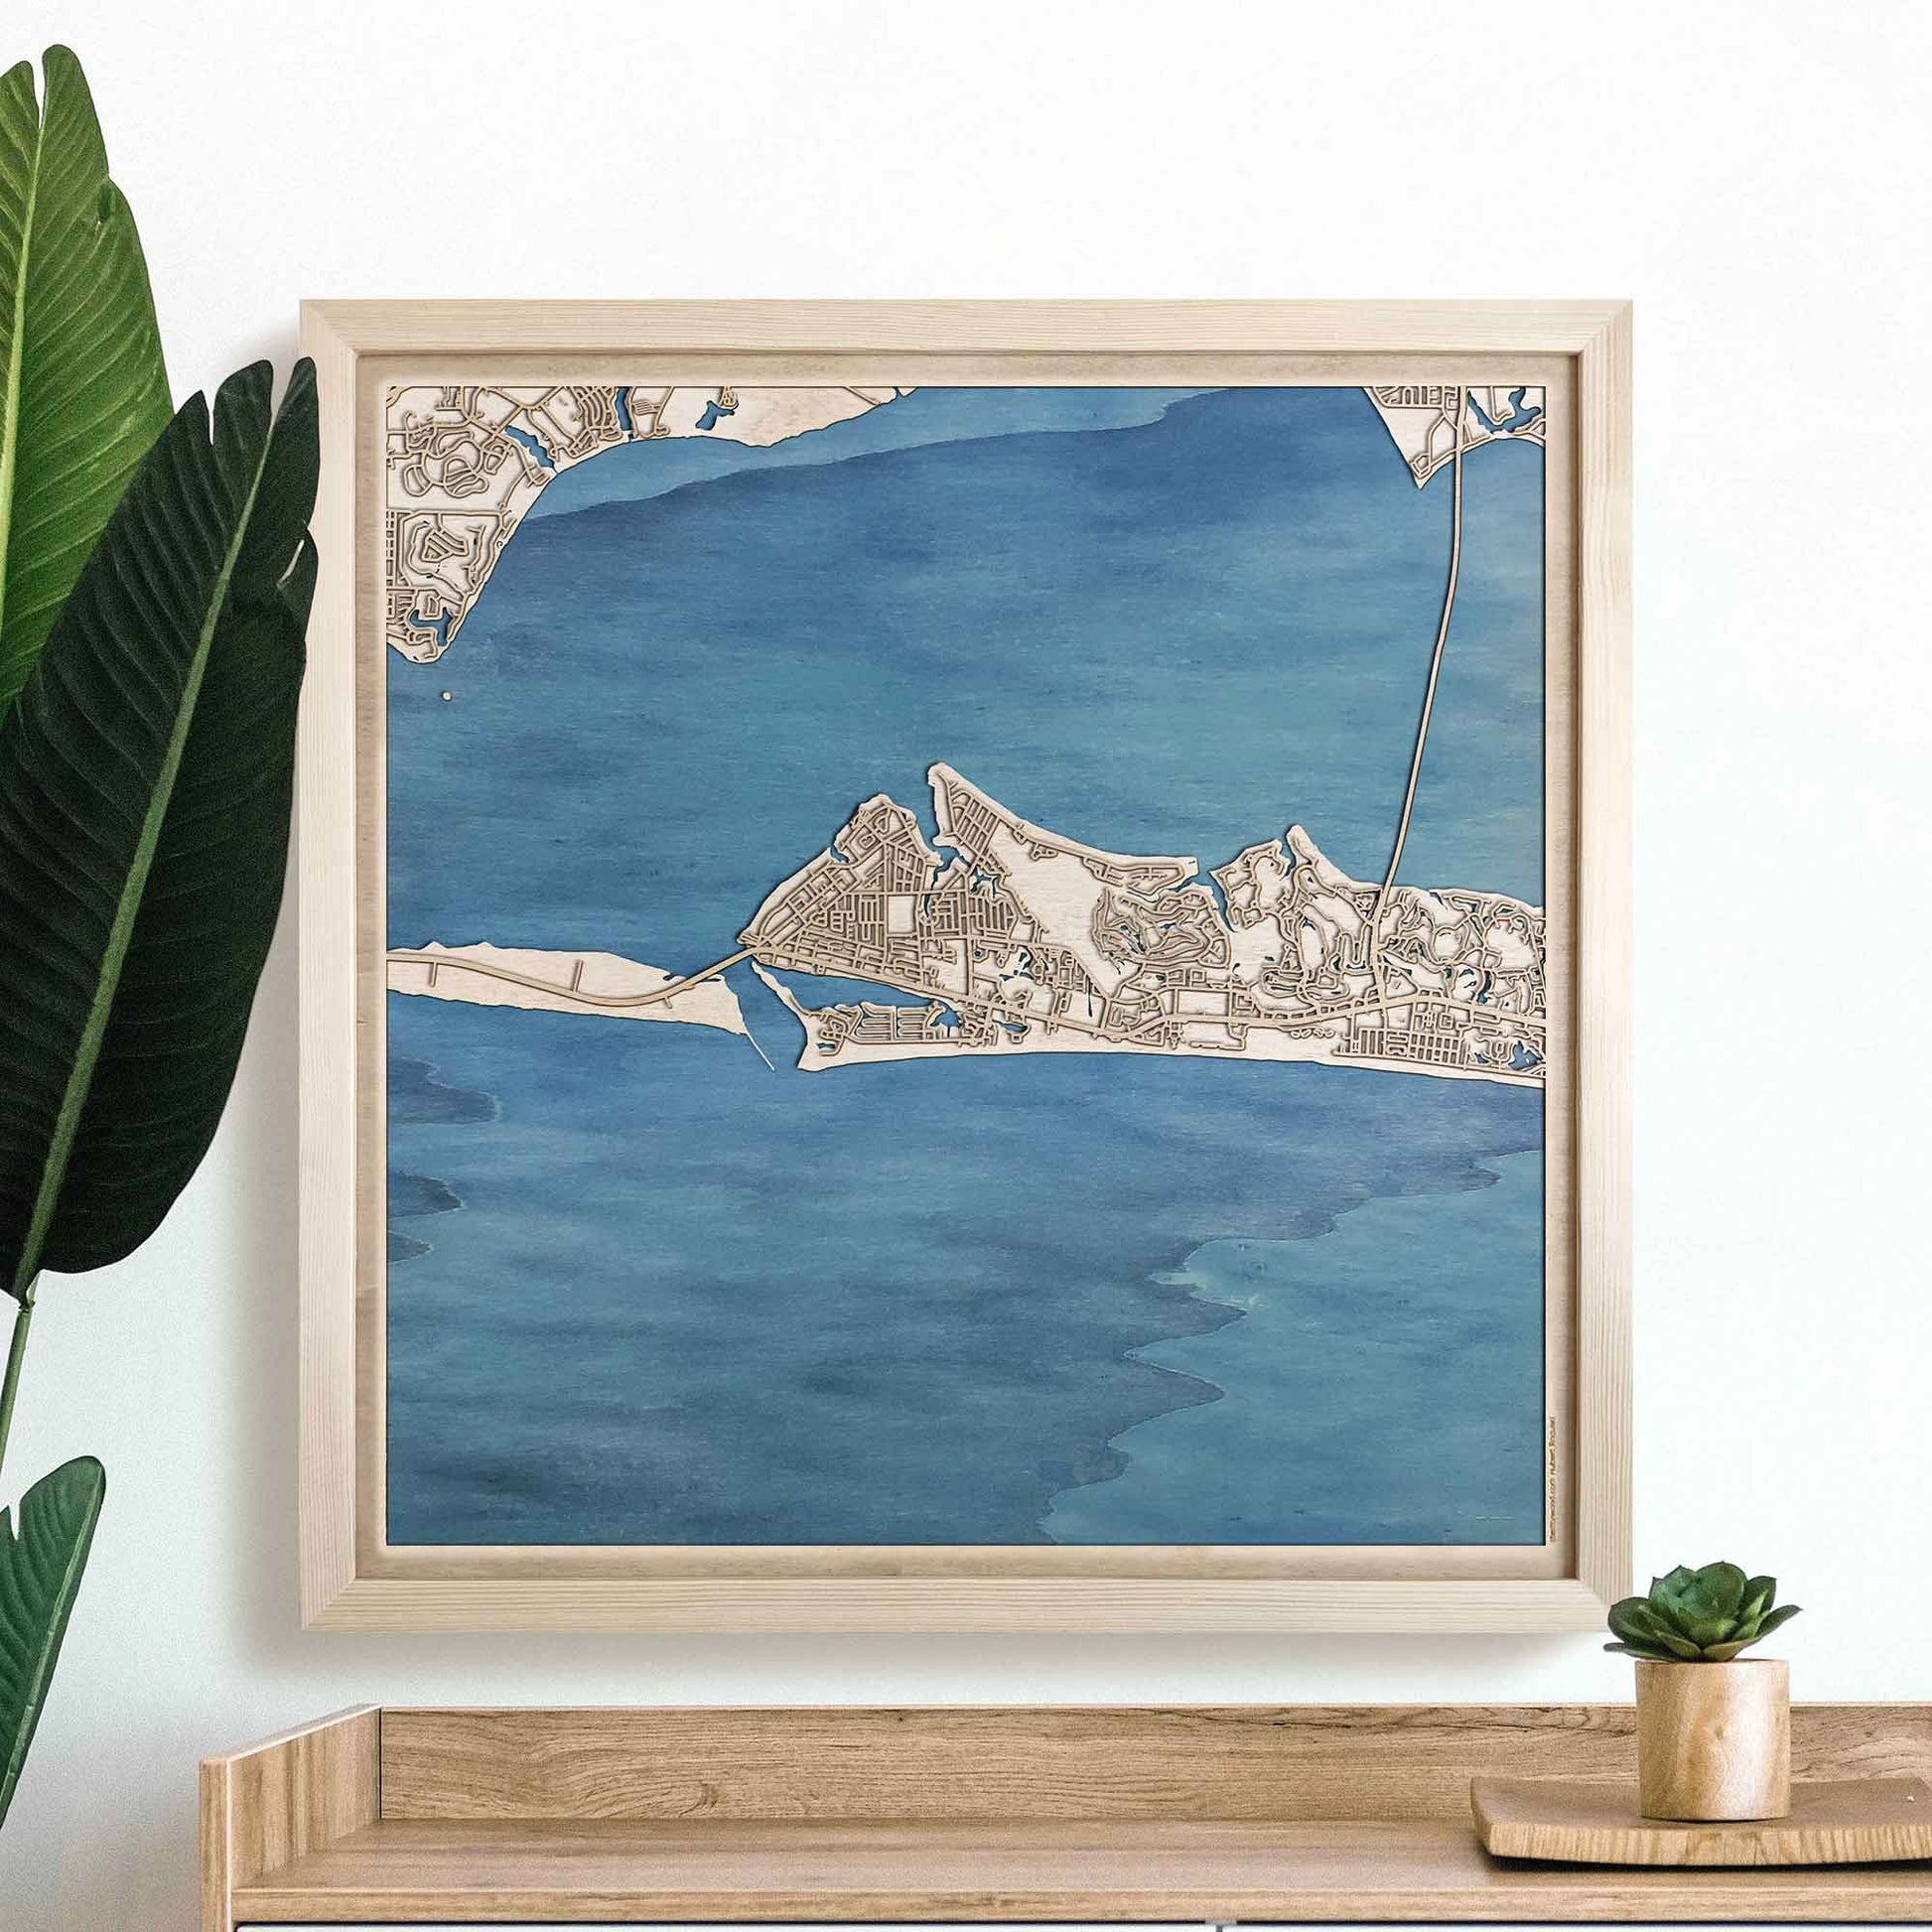 Destin Wooden Map by CityWood - Custom Wood Map Art - Unique Laser Cut Engraved - Anniversary Gift